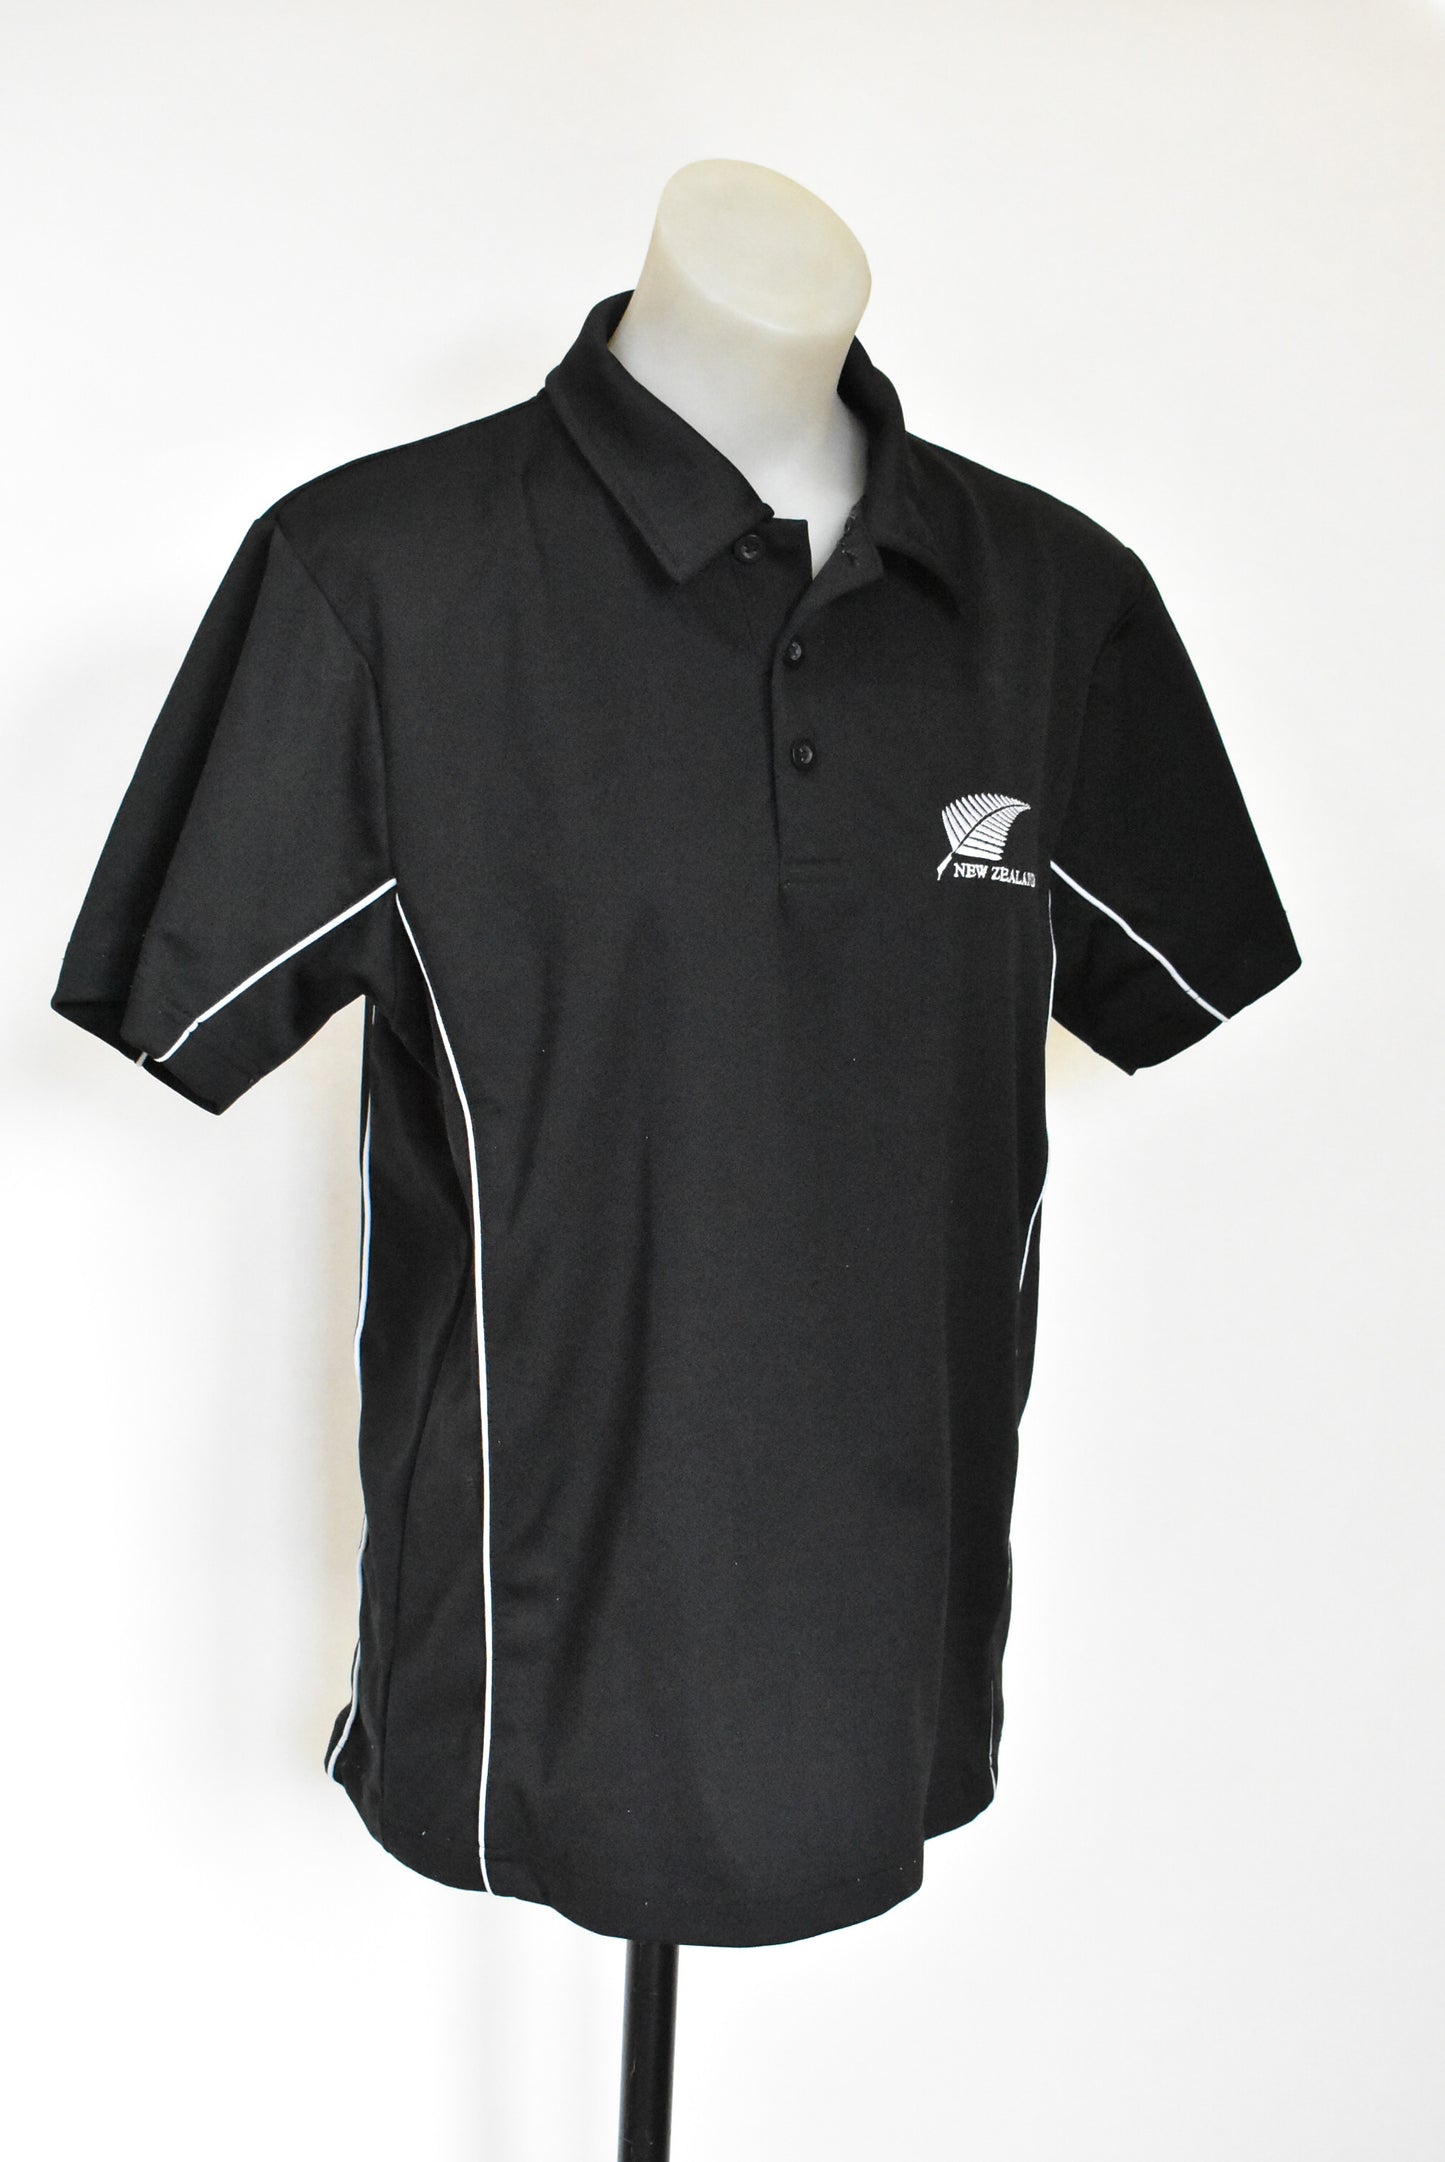 Outward Bound Sport officially licensed NZ merch polo, S